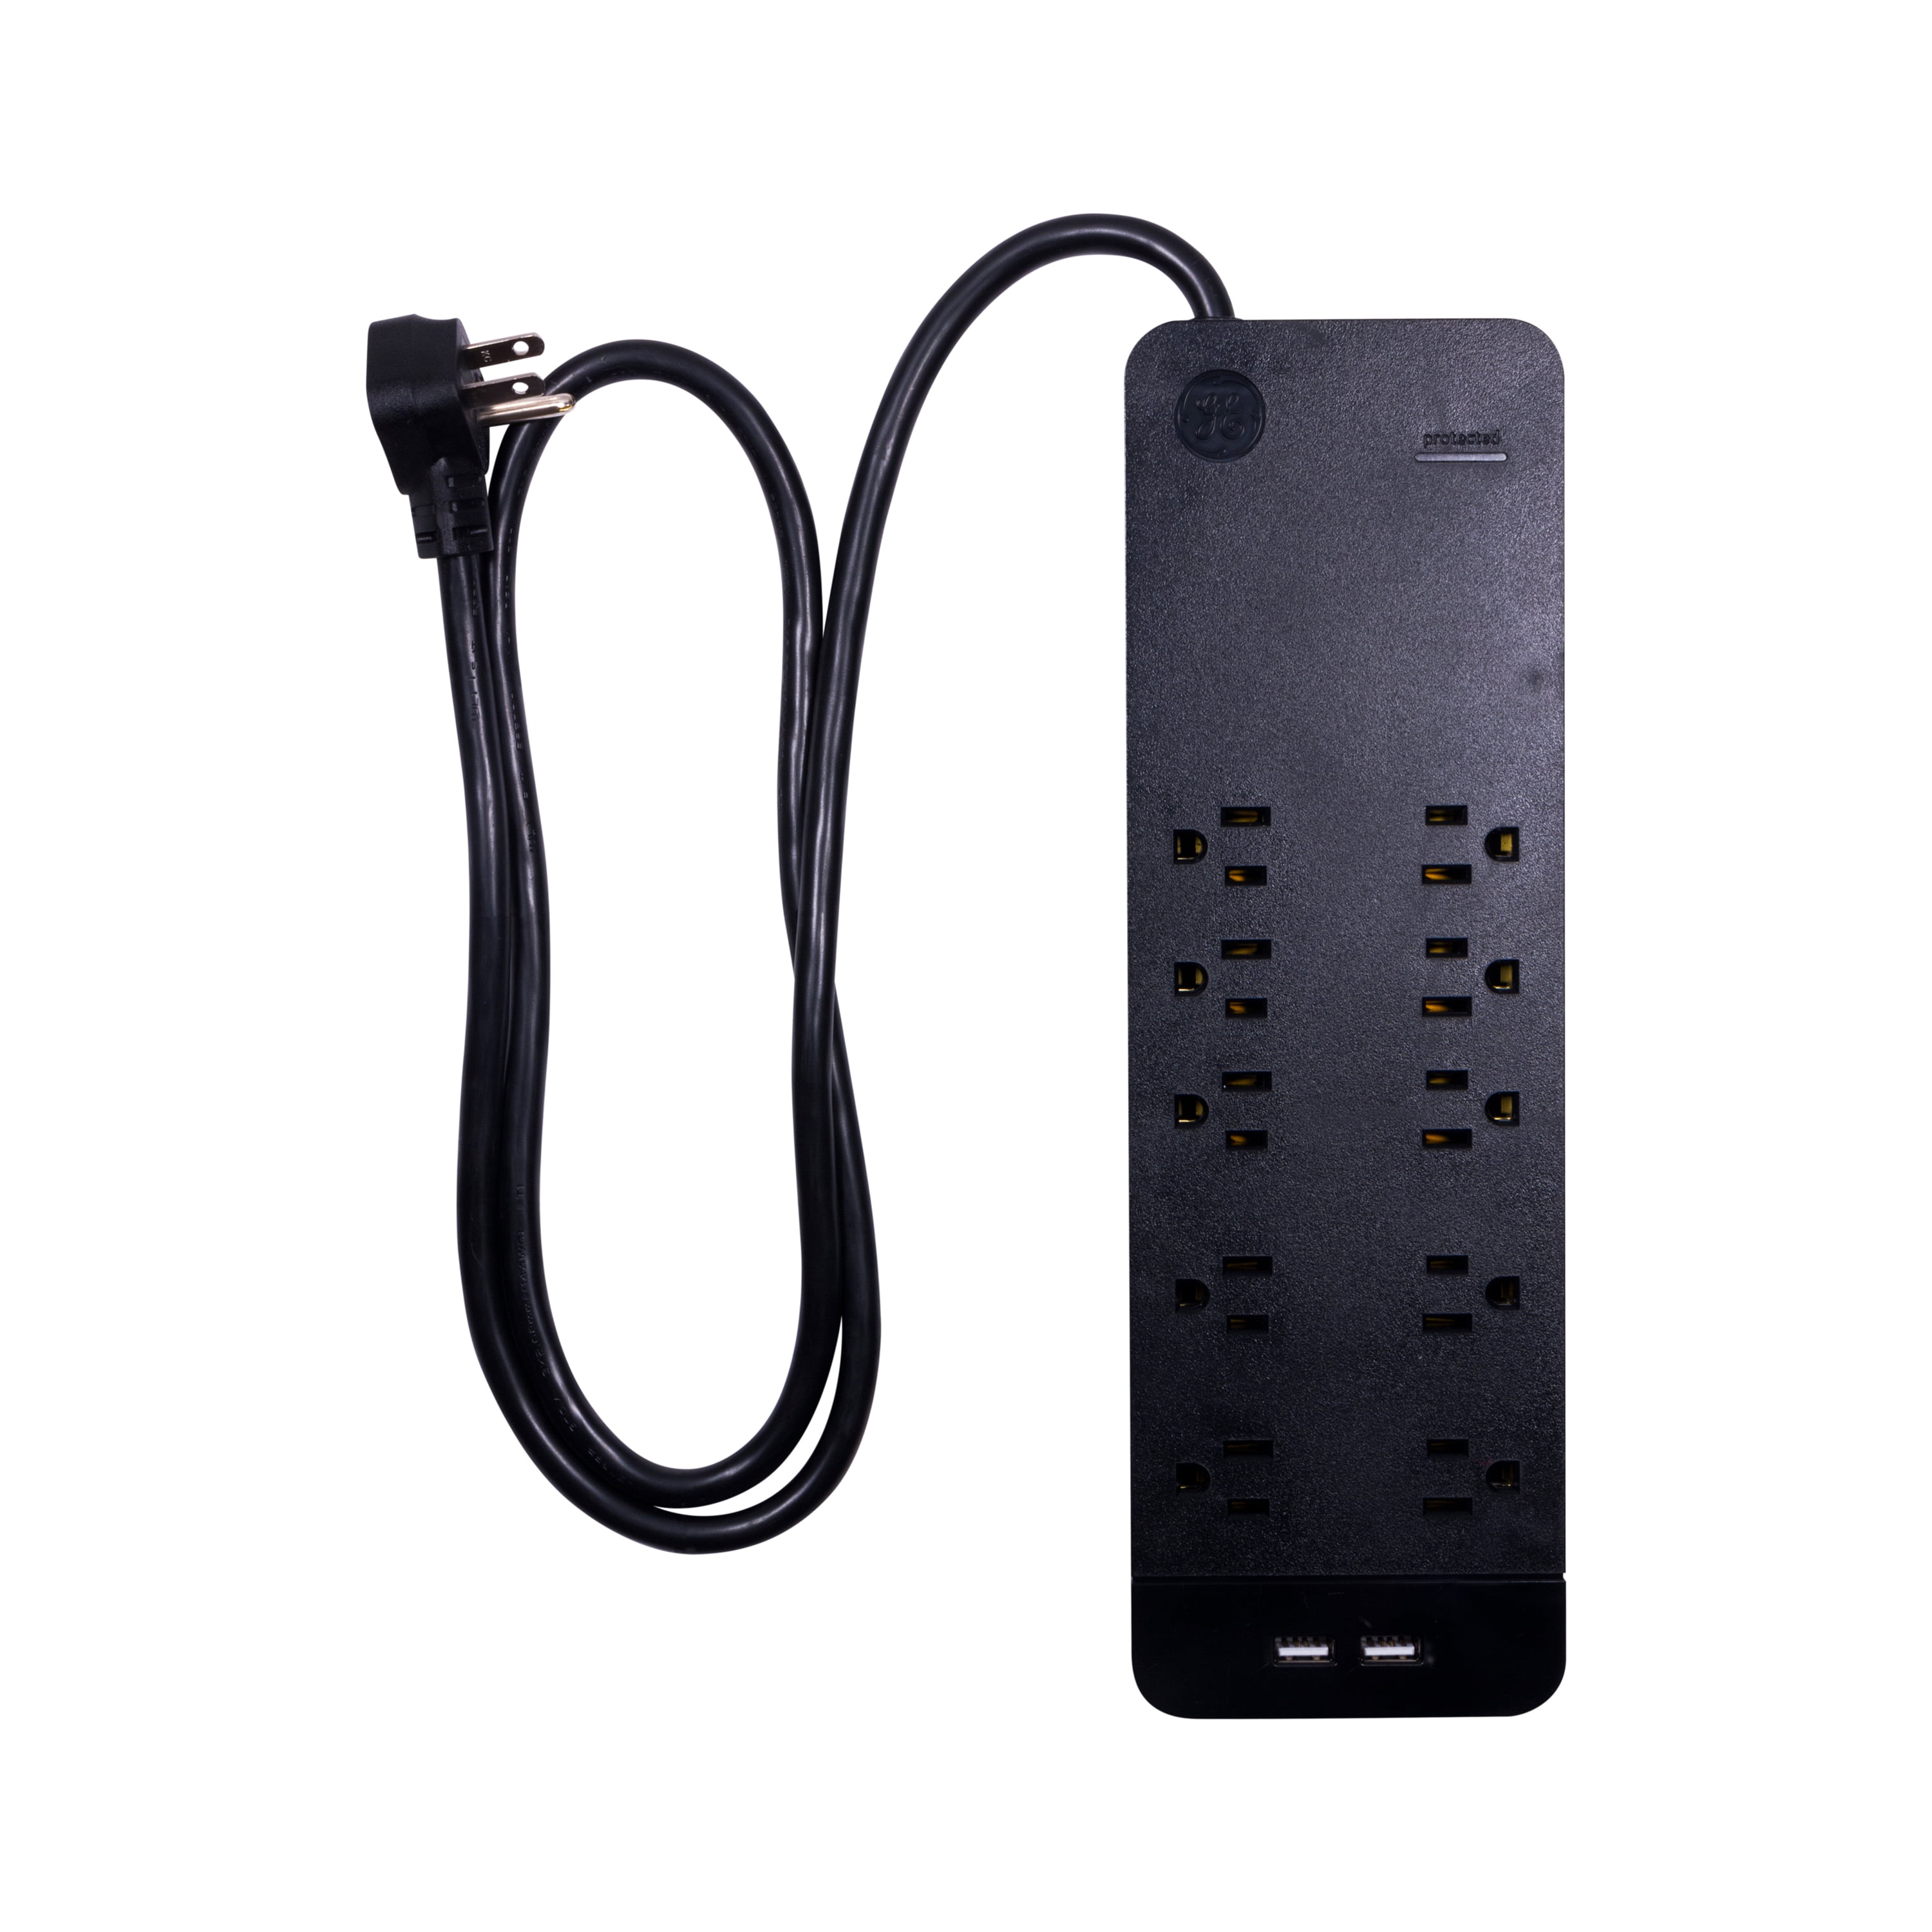 2.1 Amp / 10 Watt GE Travel Charger Surge Protector with Dual USB Ports Jasco Products 4330941411